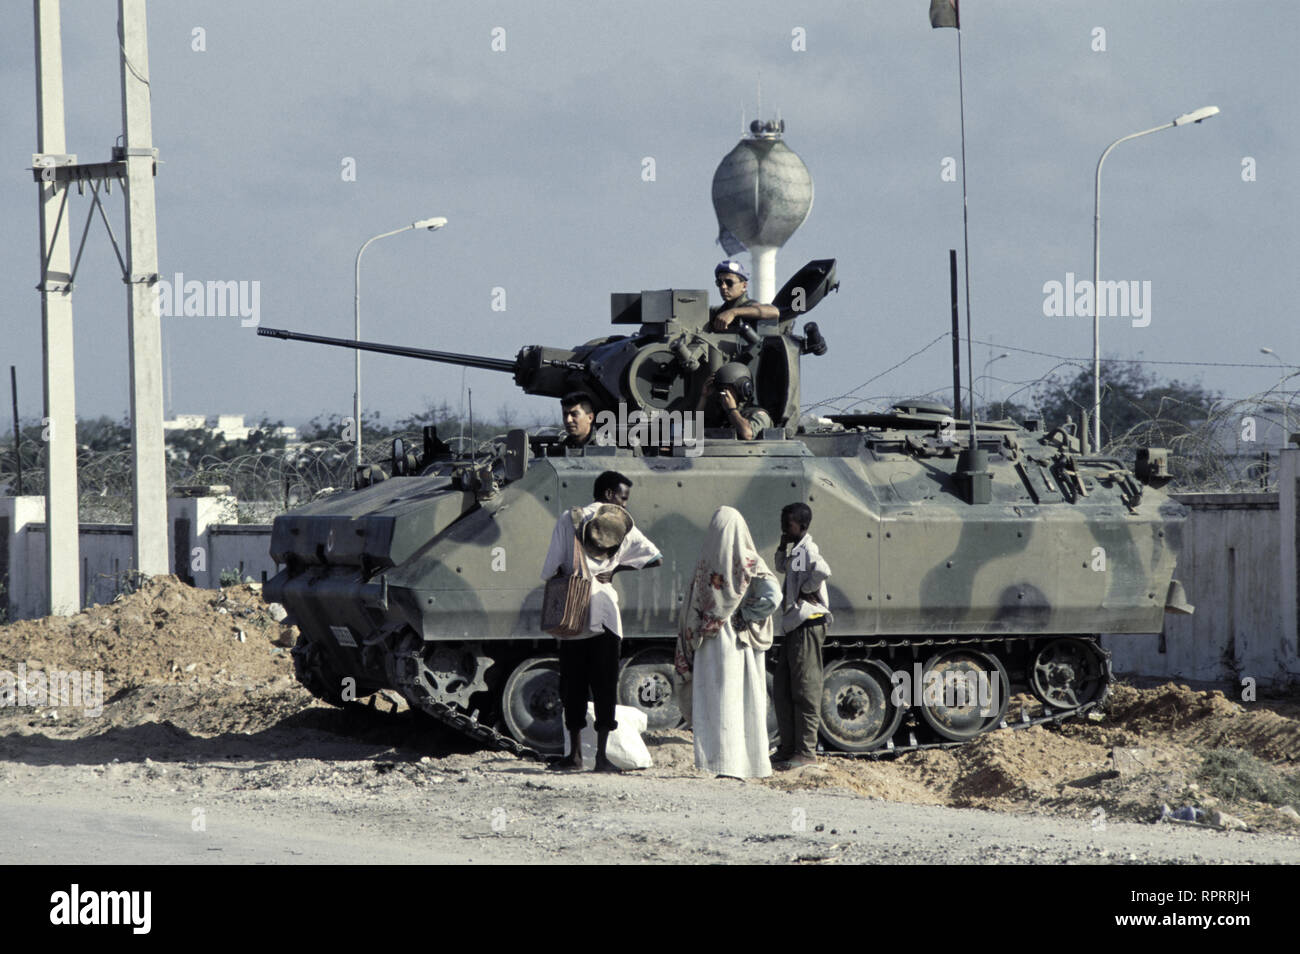 16th October 1993 An FNSS Defense Systems Turkish IFV (Infantry Fighting Vehicle) outside UNOSOM HQ in Mogadishu, Somalia. Stock Photo